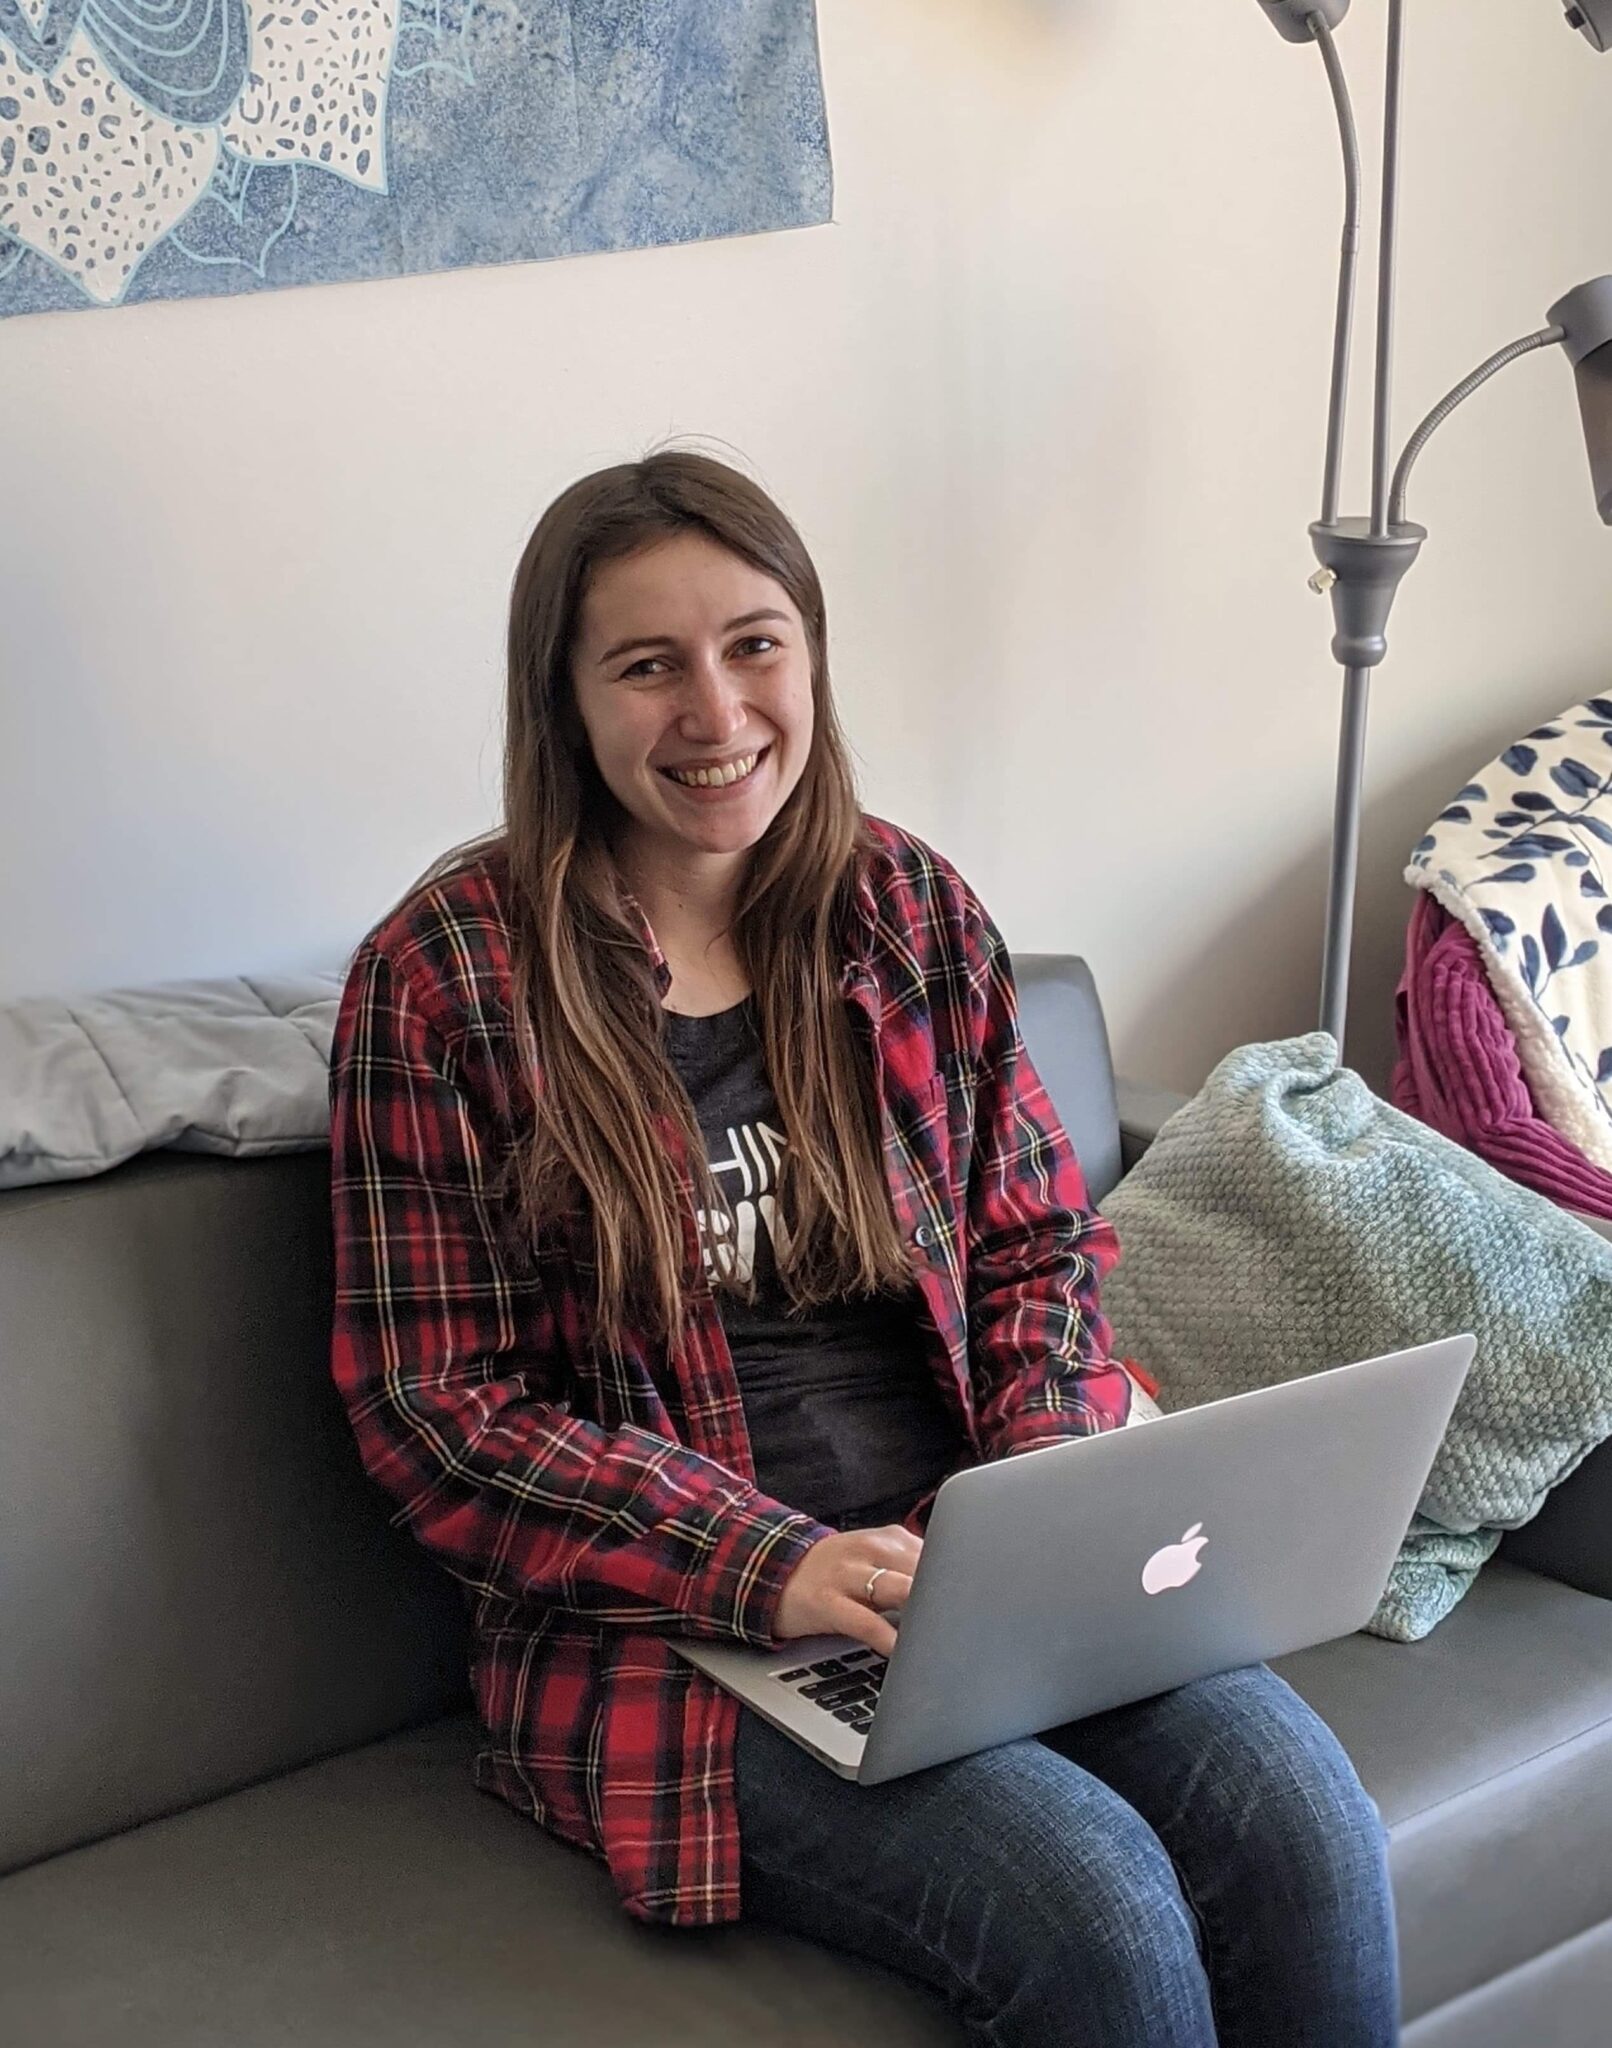 A smiling Tessa Houston sitting on a couch with a laptop.